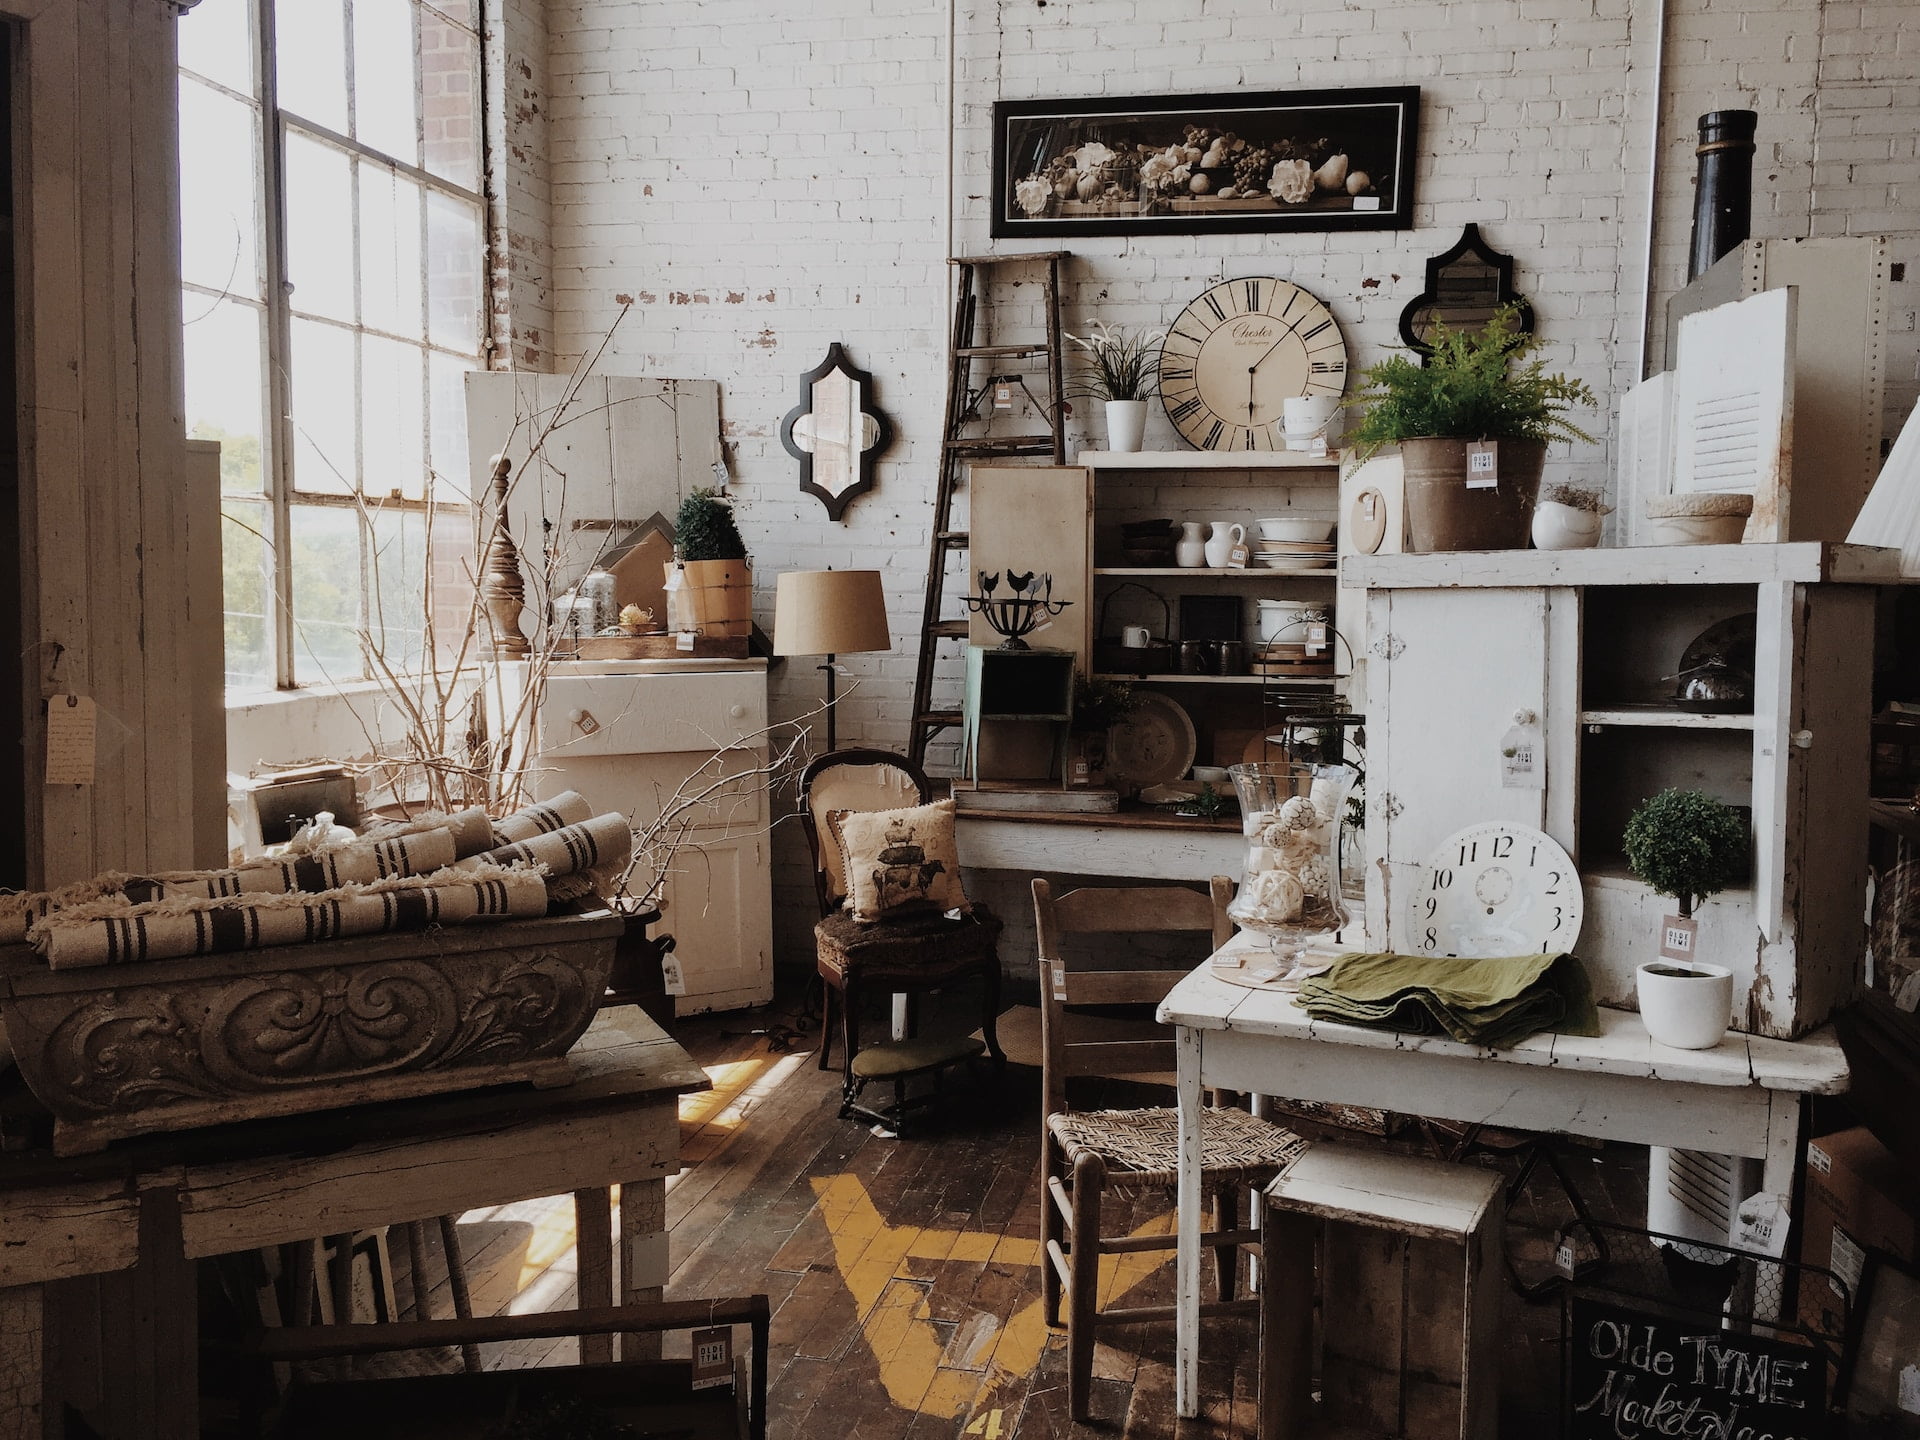 Tips for Getting Antique Furniture and Furnishings